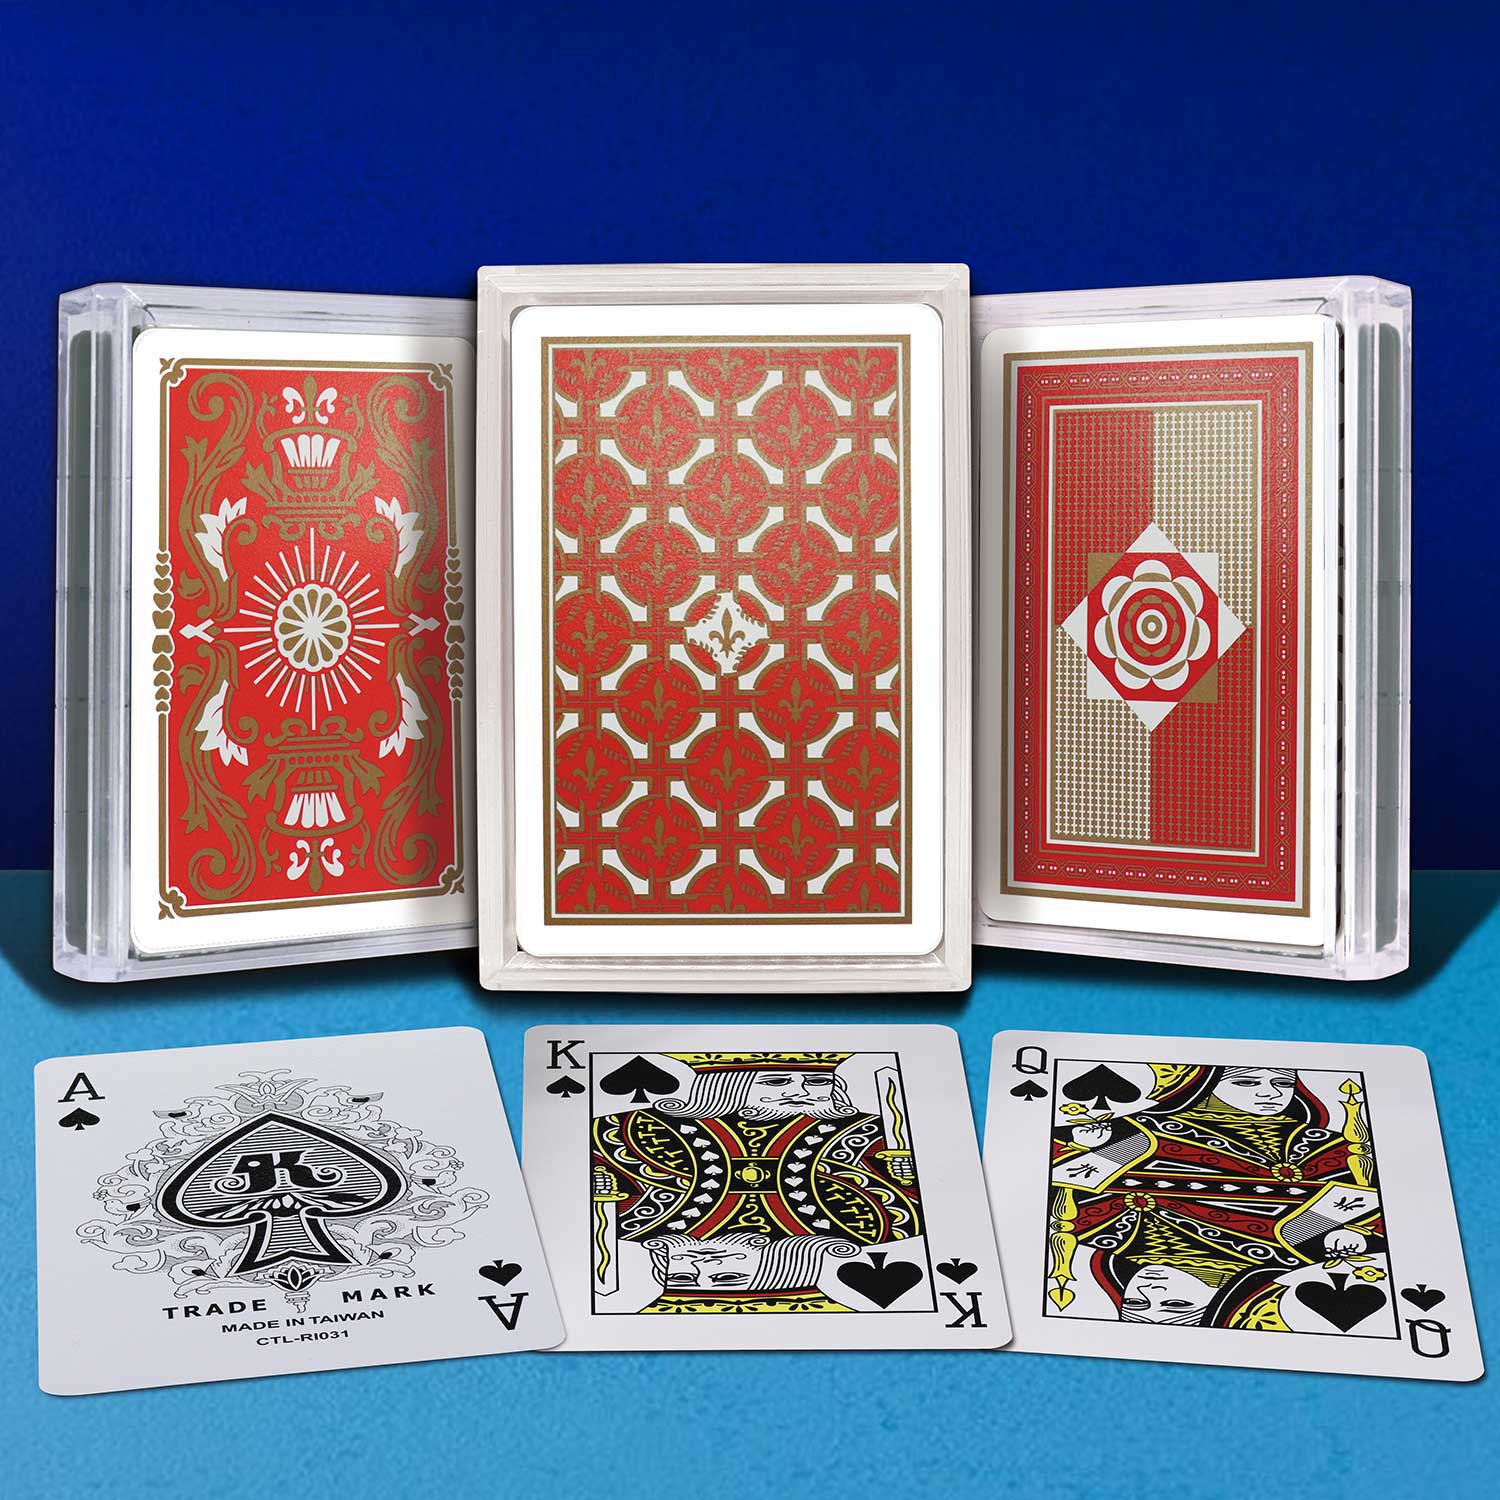 Royal Matte Plastic Playing Cards Standard Index